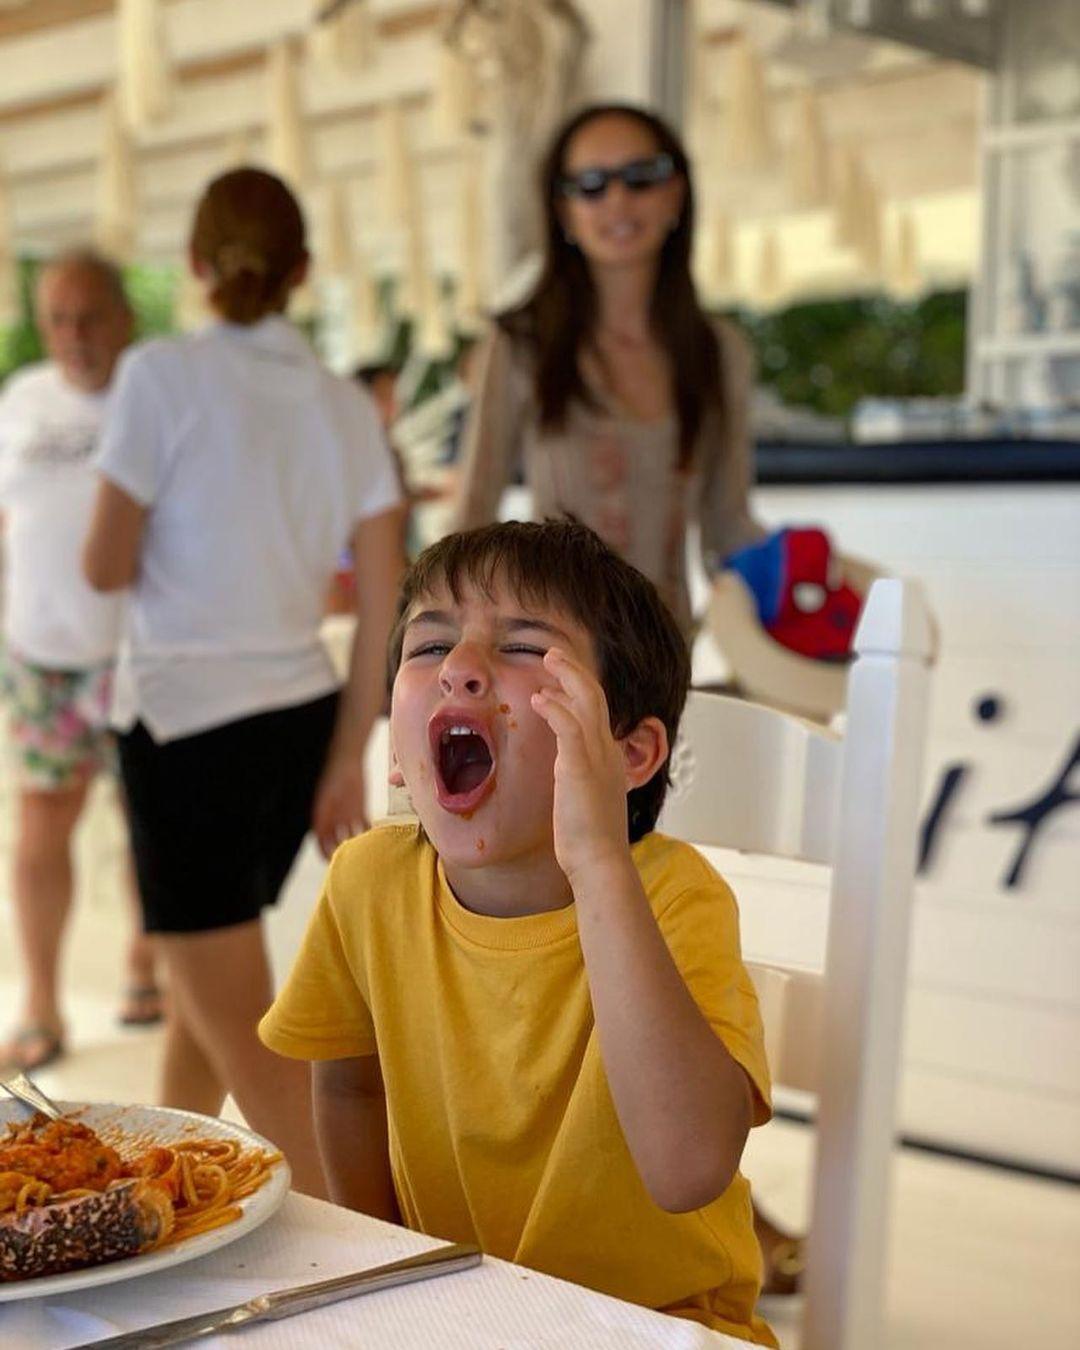 Haha, look at this foodie kid Taimur, who is enjoying the time of his life in Italy